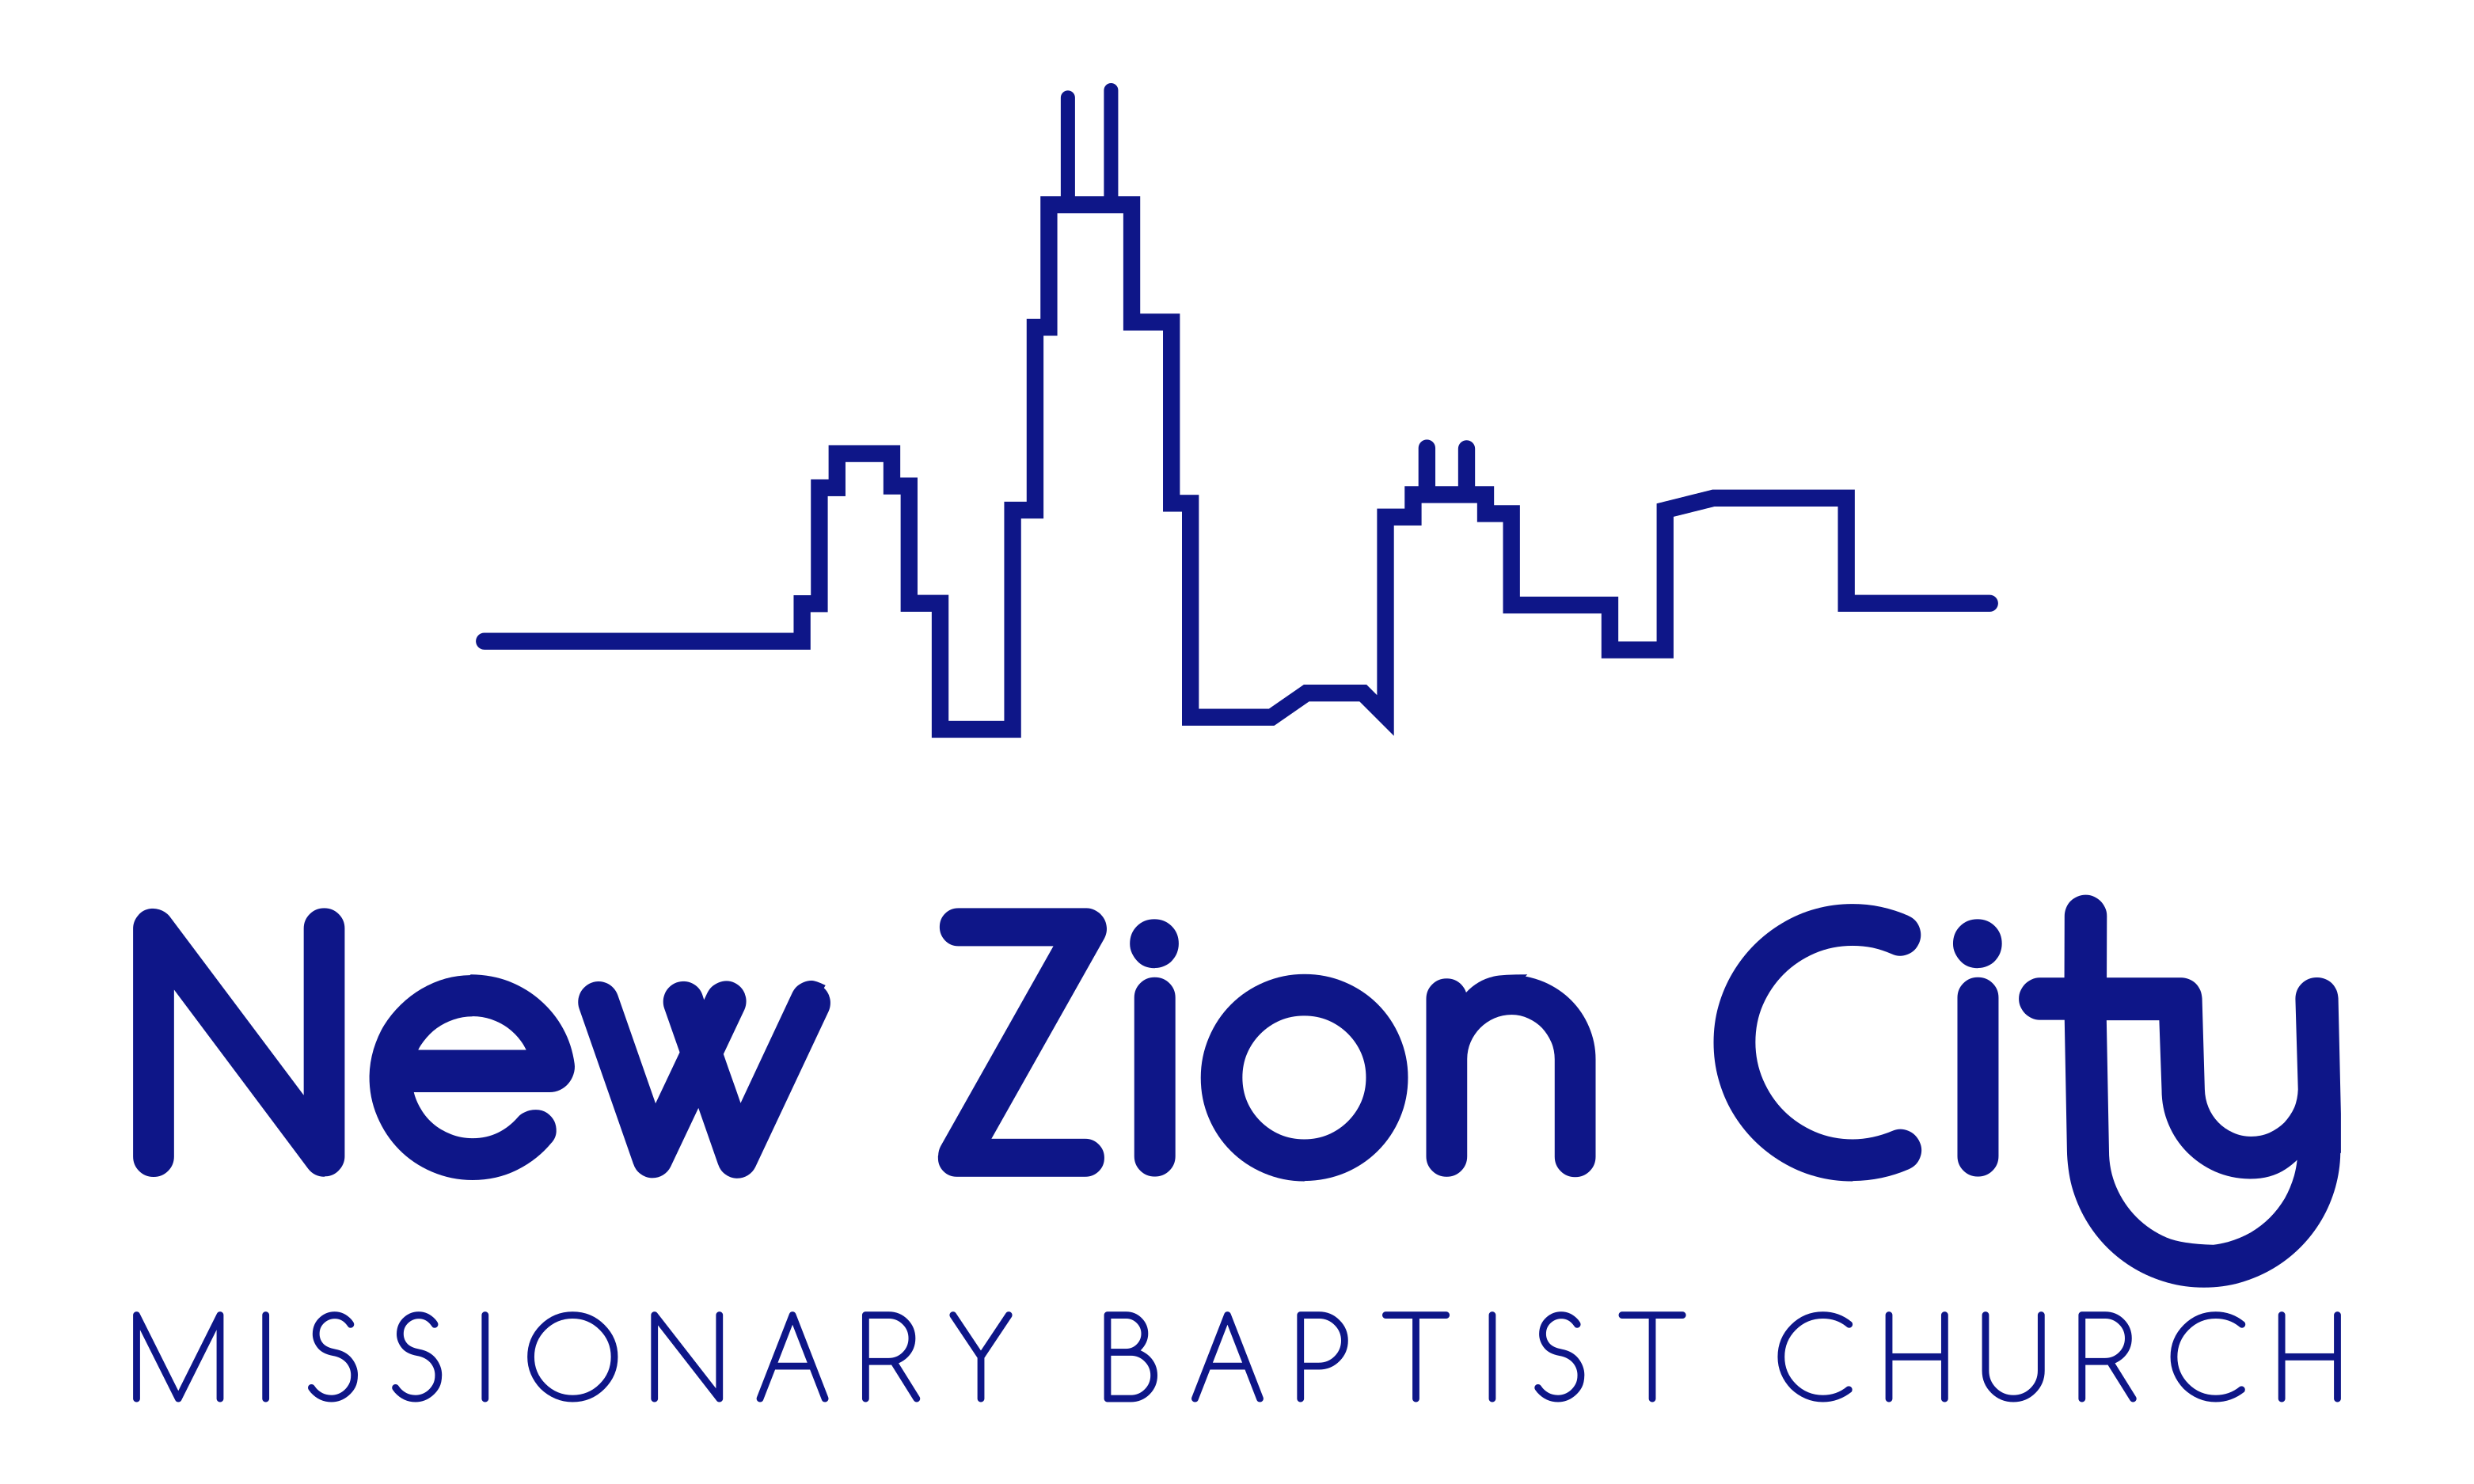 Welcome to The New Zion City Missionary Baptist Church of Chicago